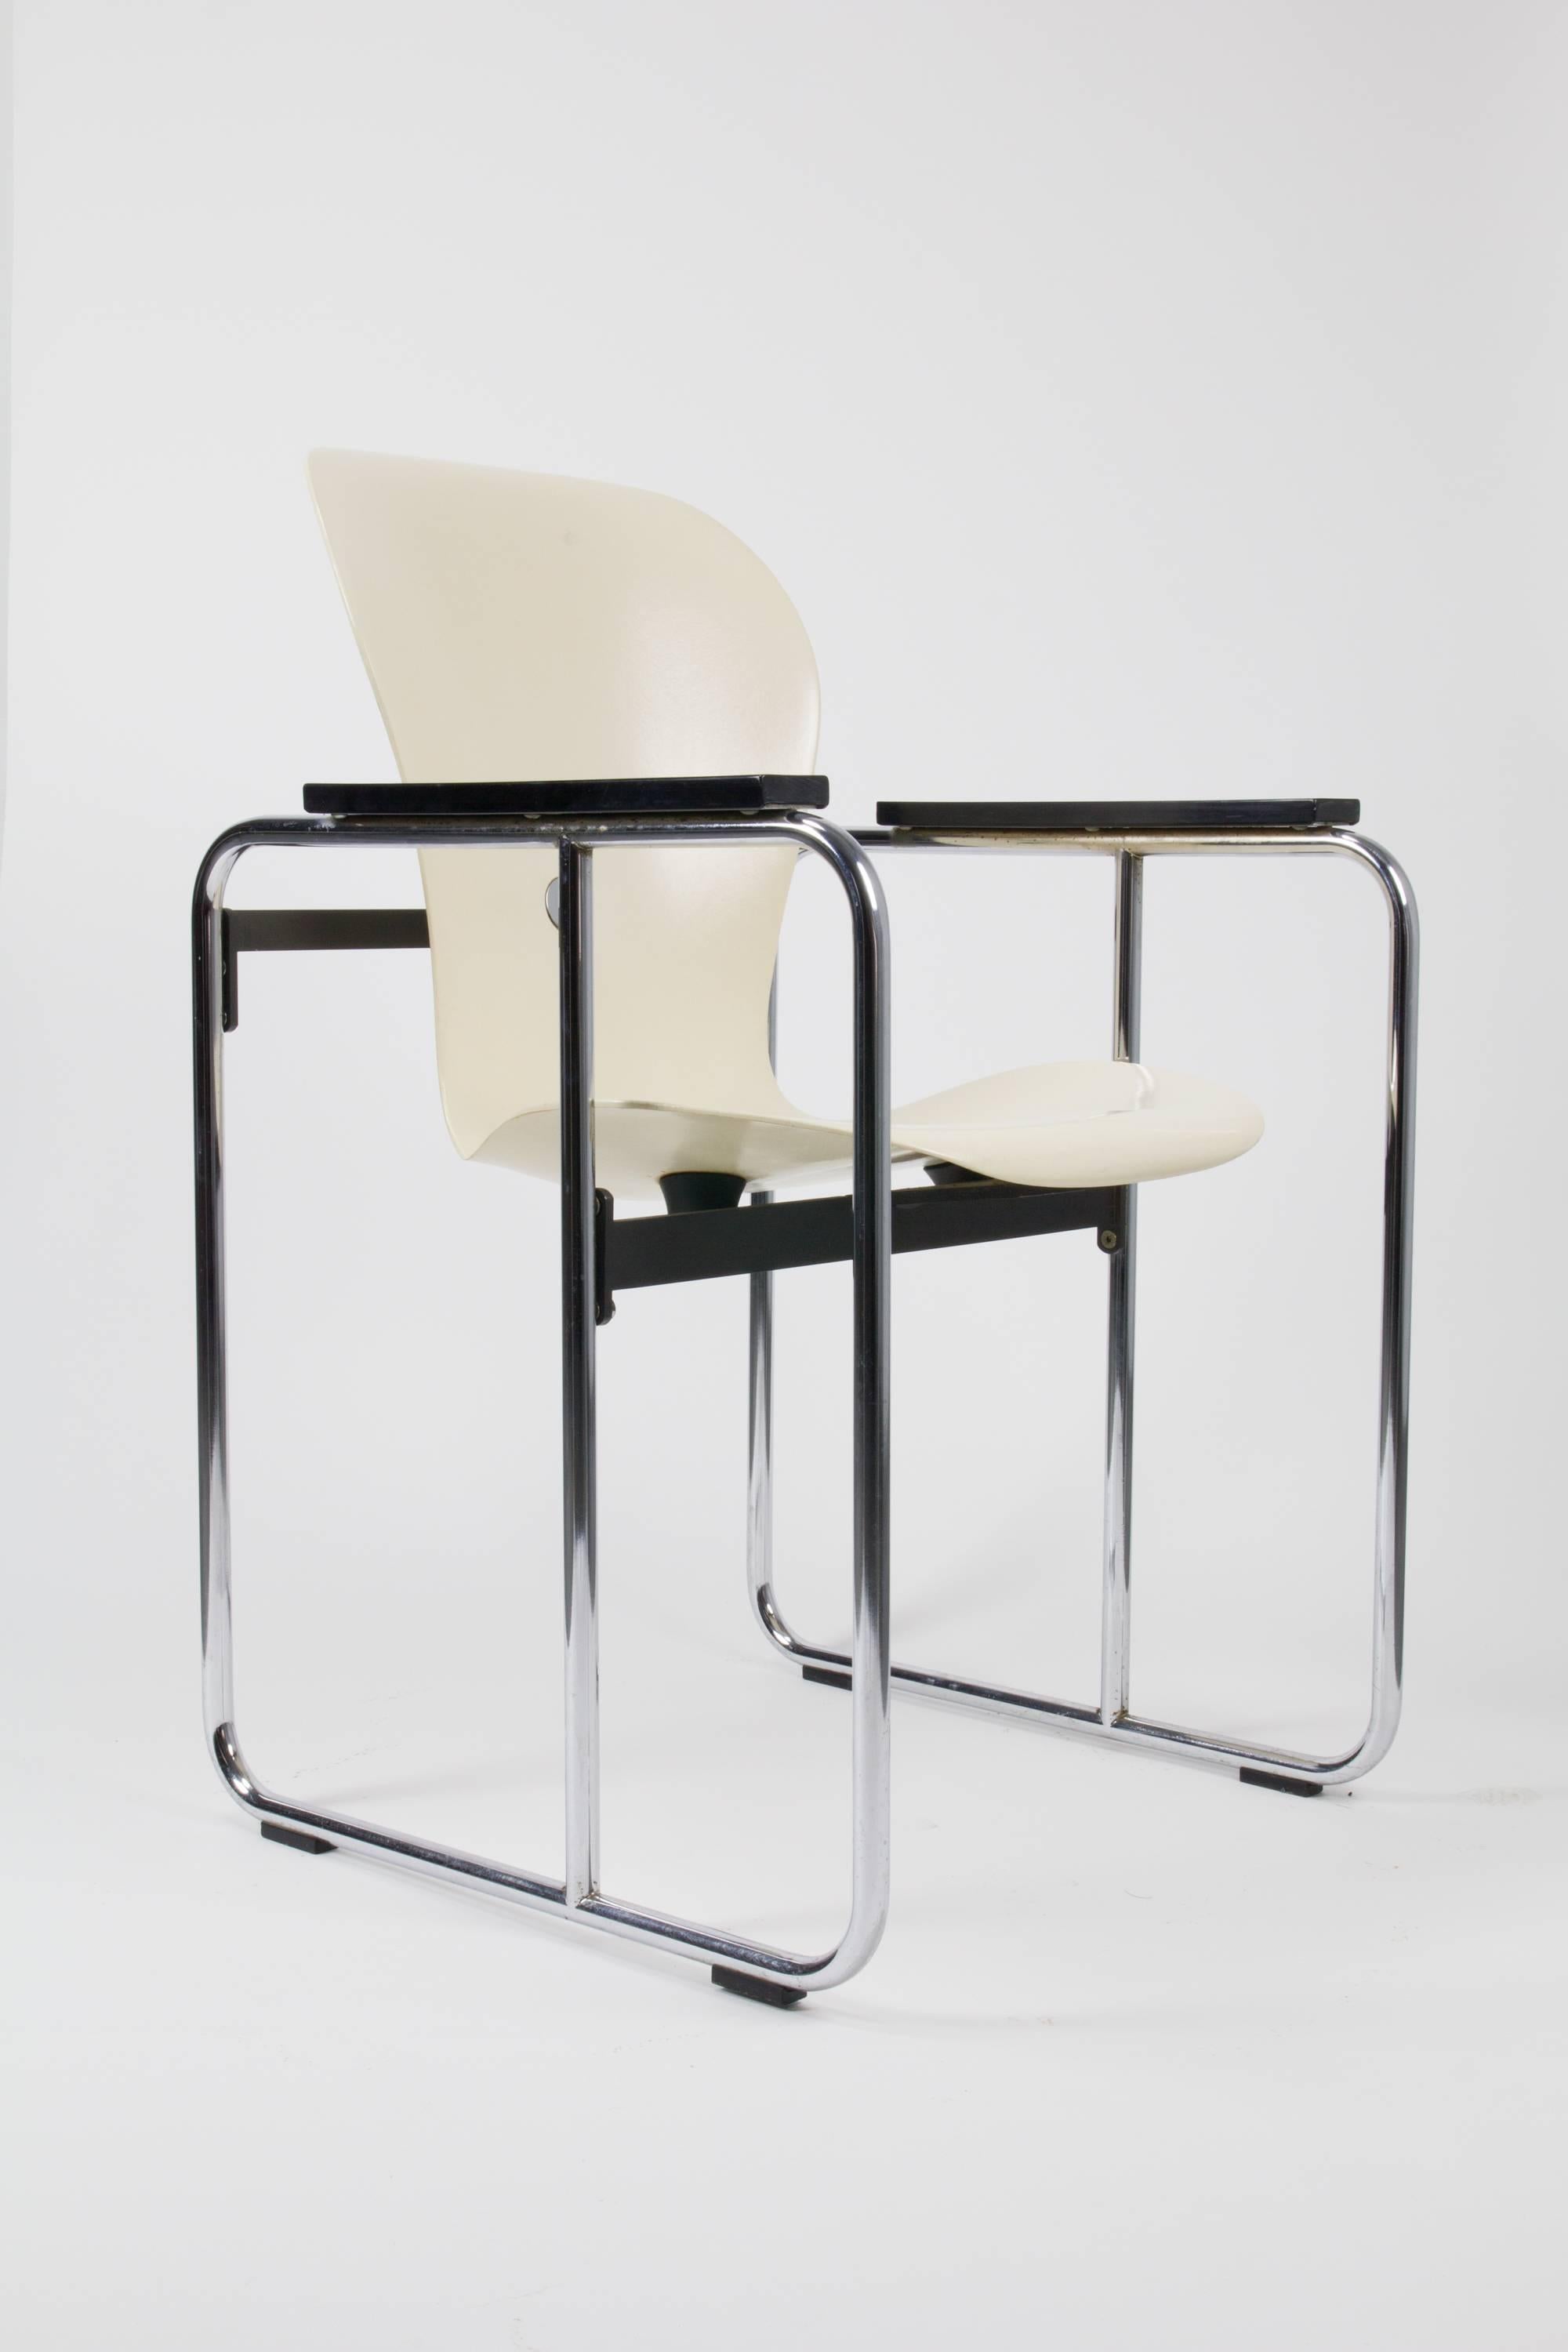 Uncommon variant of the Ion chair by Gideon Kramer, with molded fiberglass seat suspended in a tubular steel cage-frame, black painted wood armrests and rubber shock mounts. Retains original label.